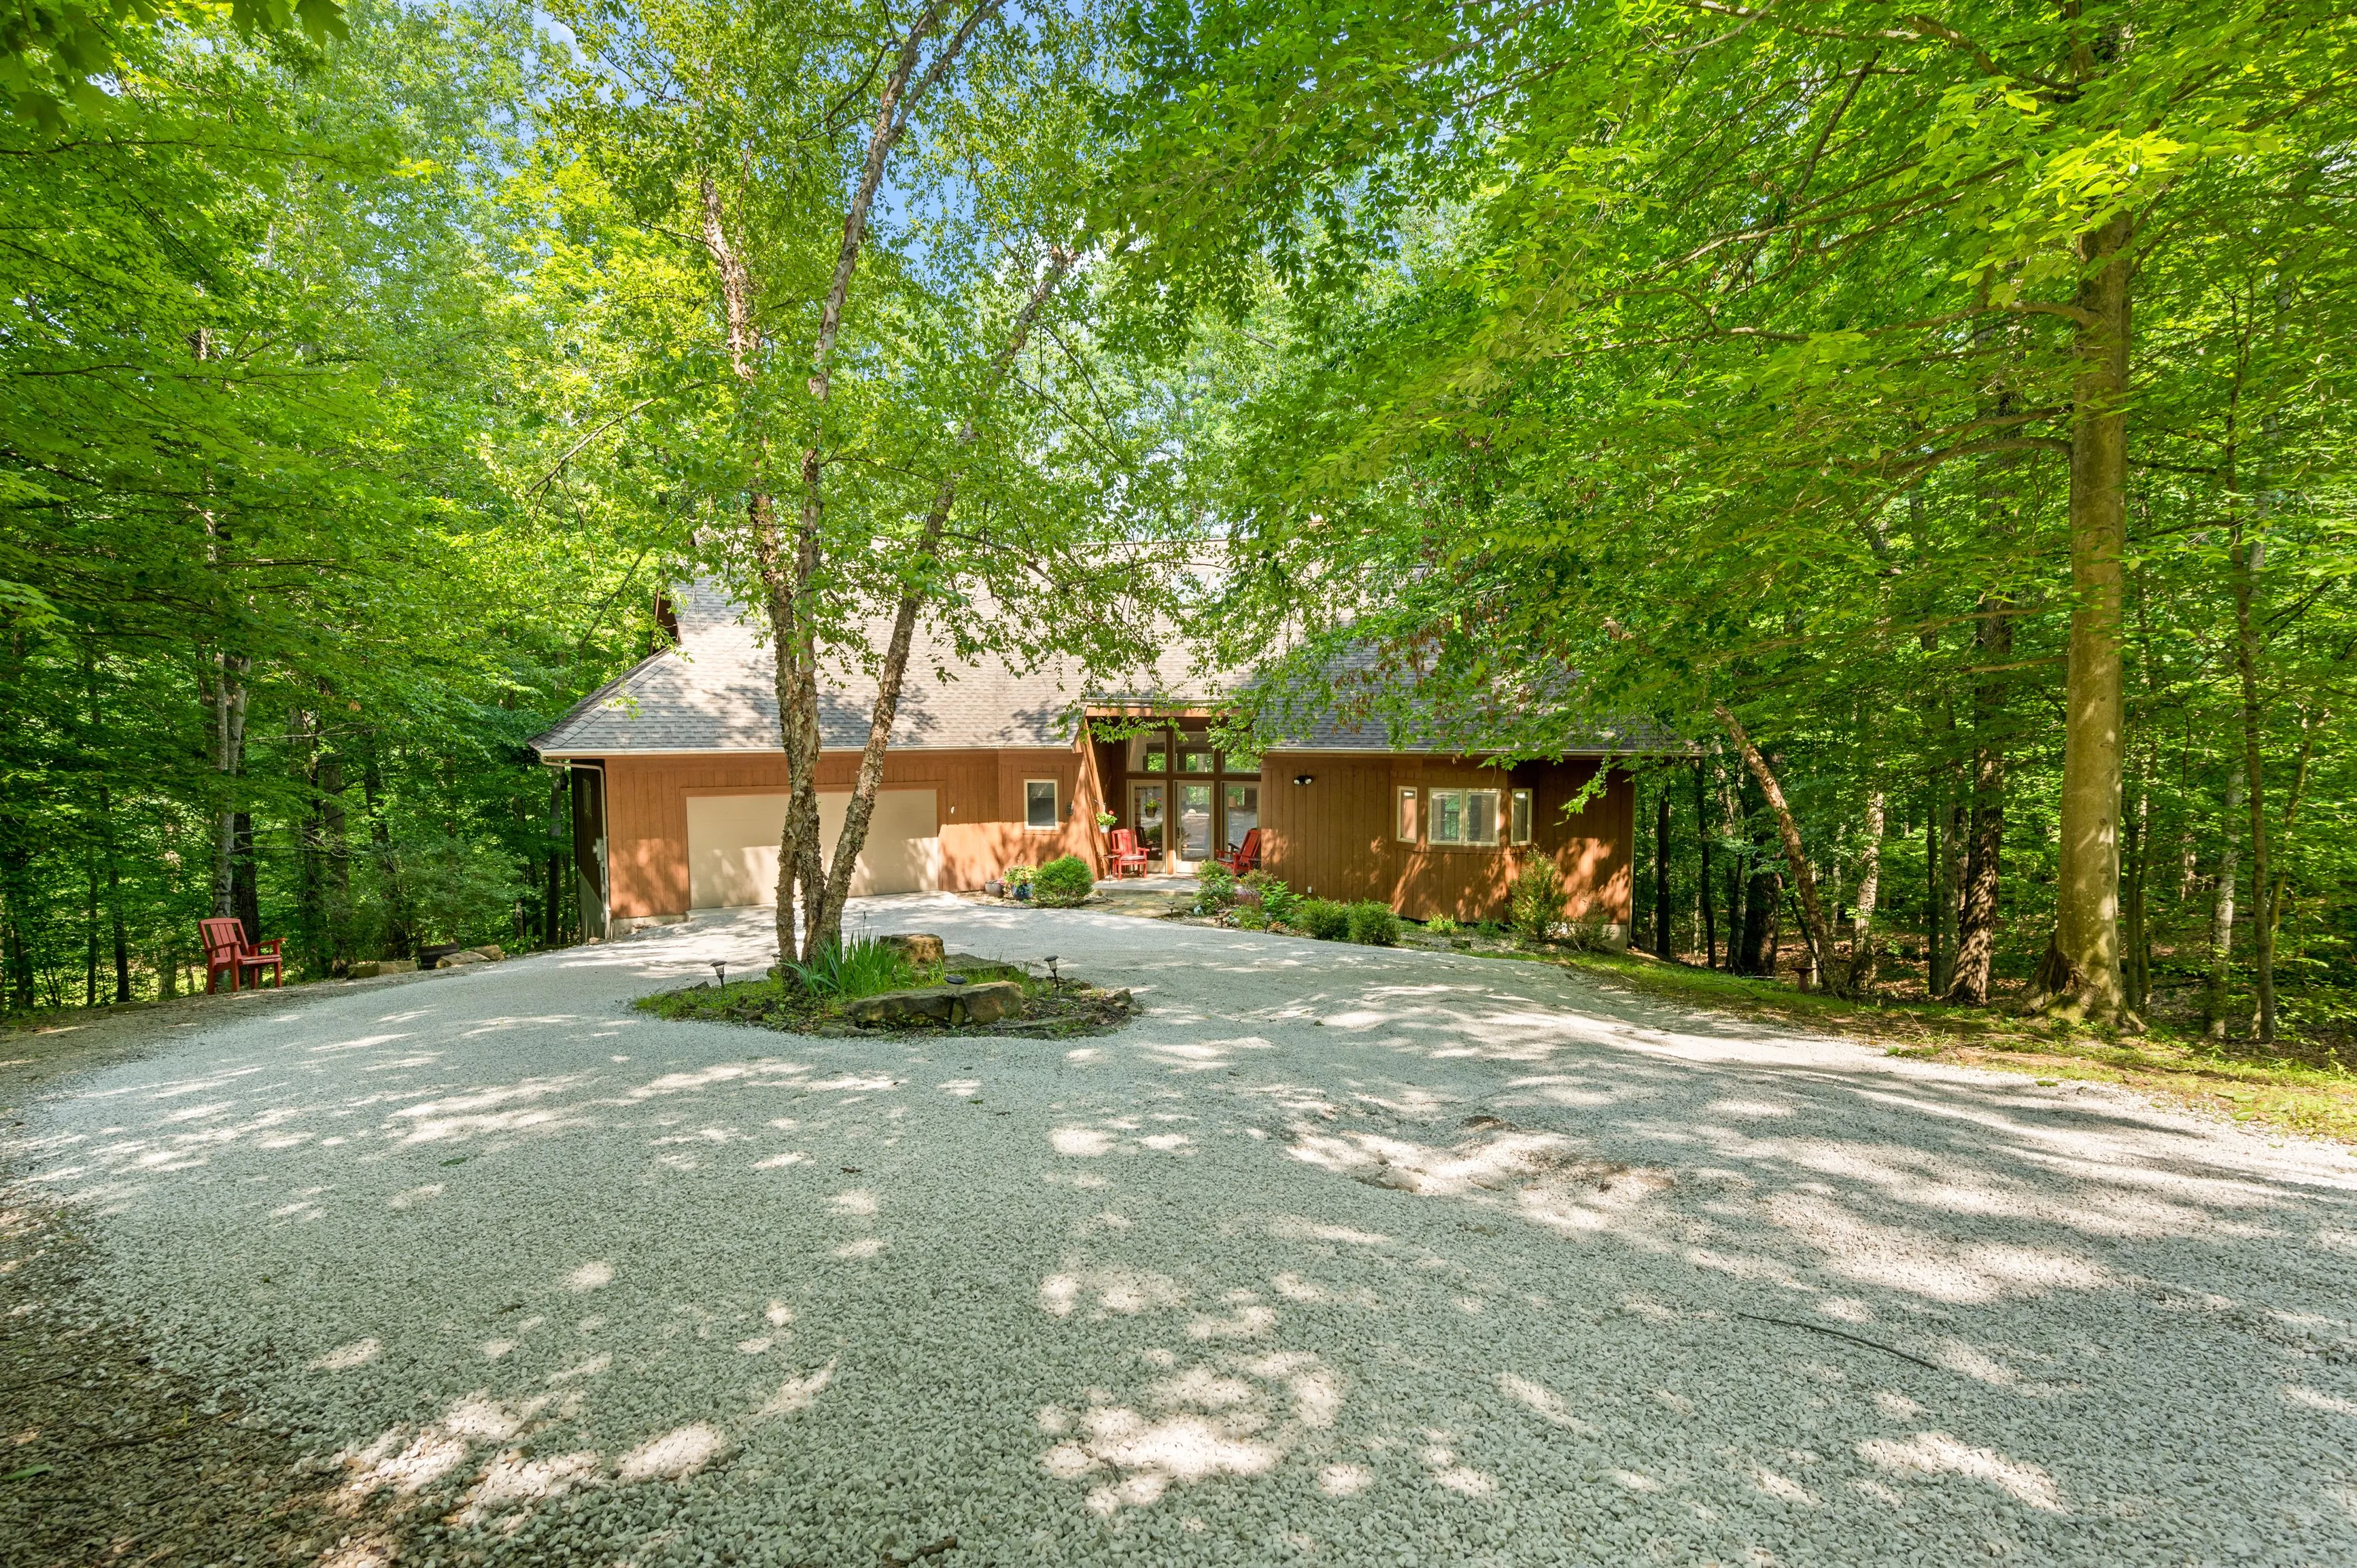 Brick house nestled in lush greenery with a circular driveway and scattered sunlight through the trees.